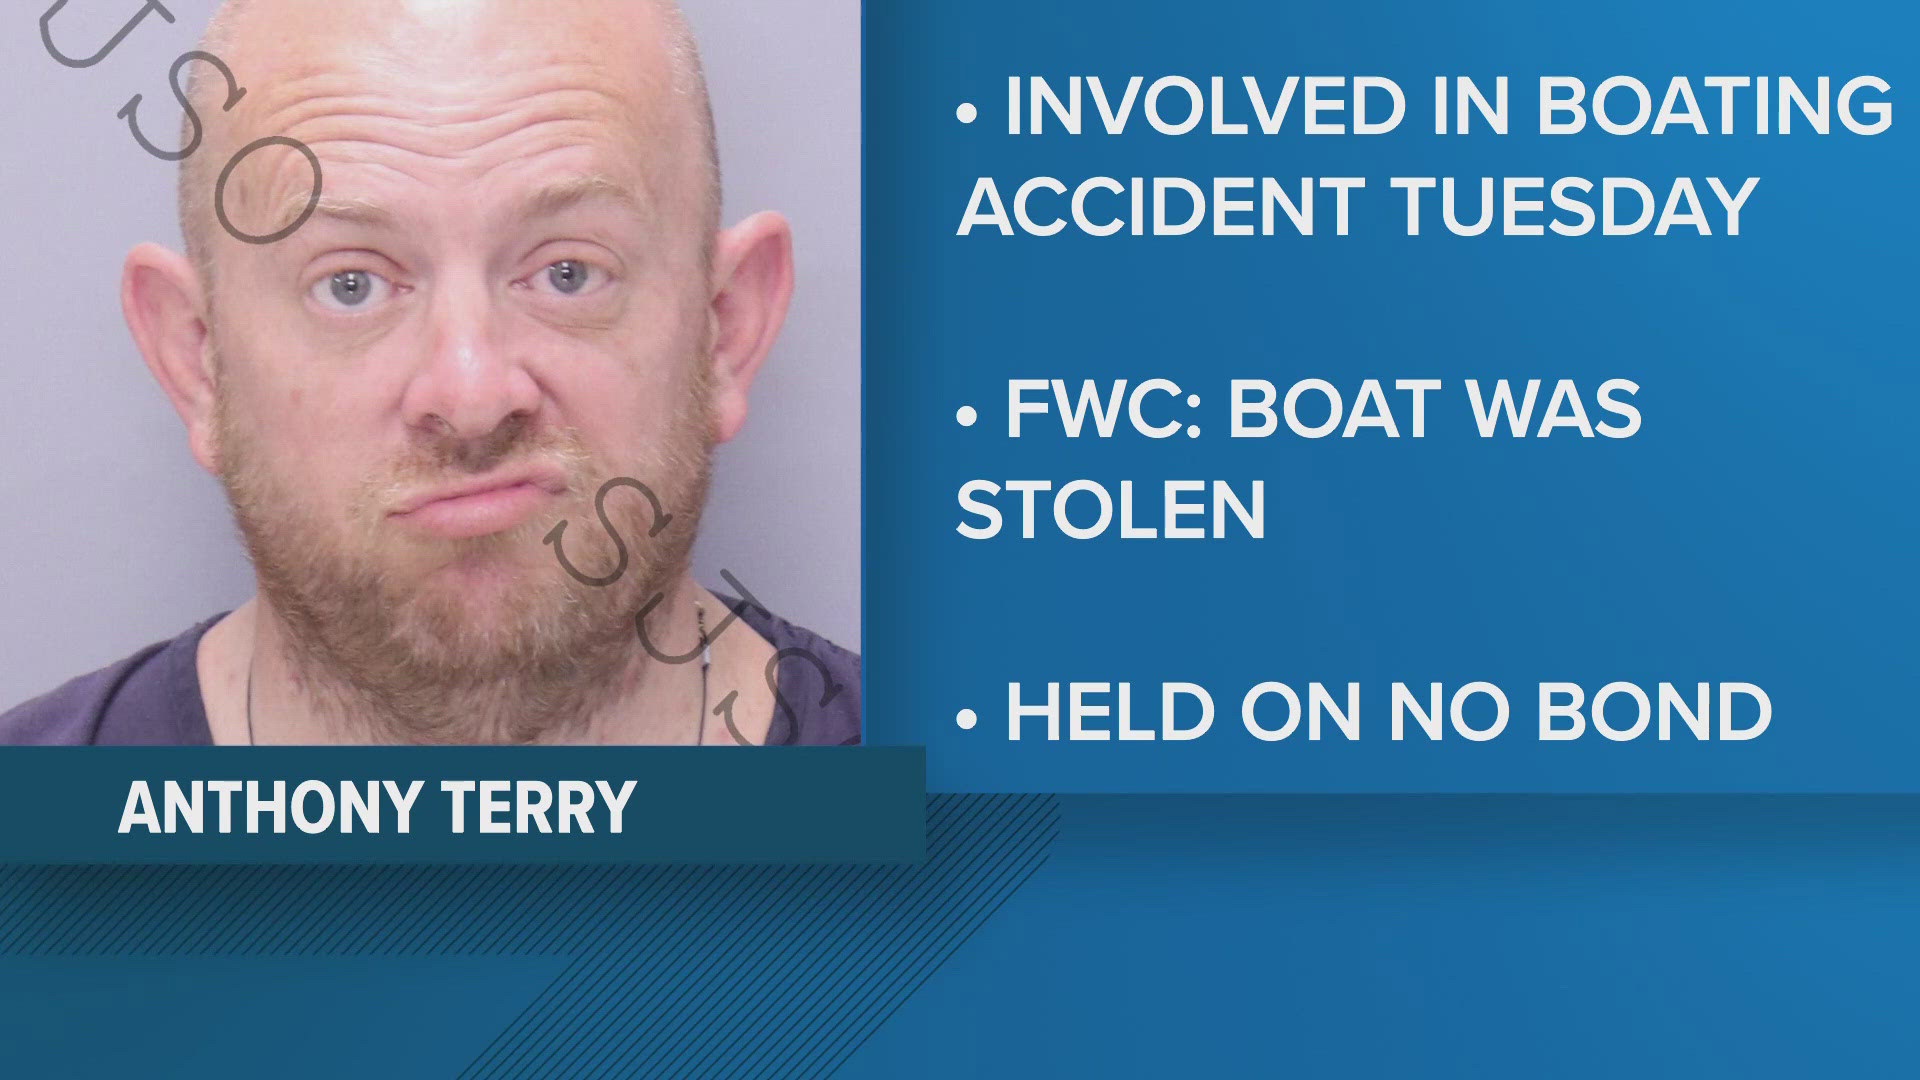 Anthony Terry, 43, was charged with property theft - $100,000 or more. The boat was a "total loss," the arrest report stated.